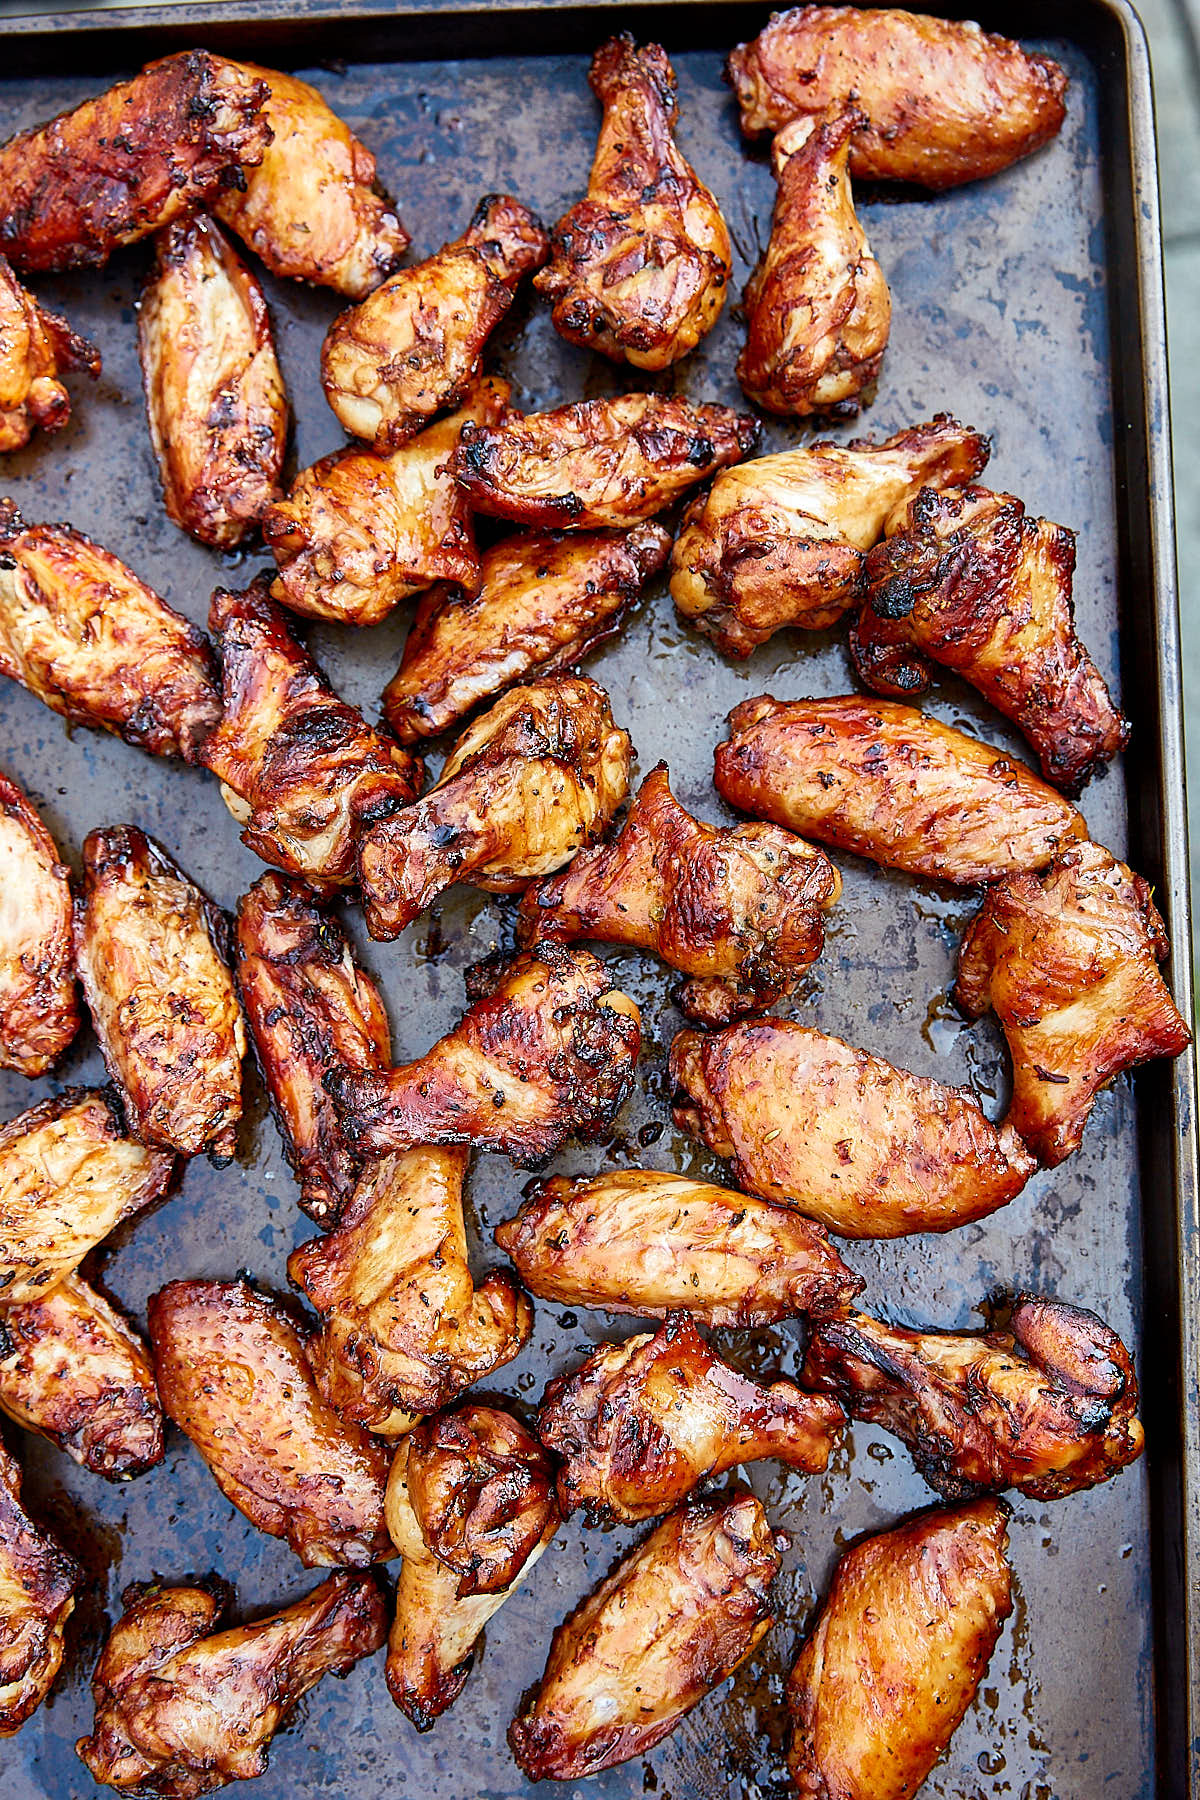 Grilled chicken wings on a large serving tray.